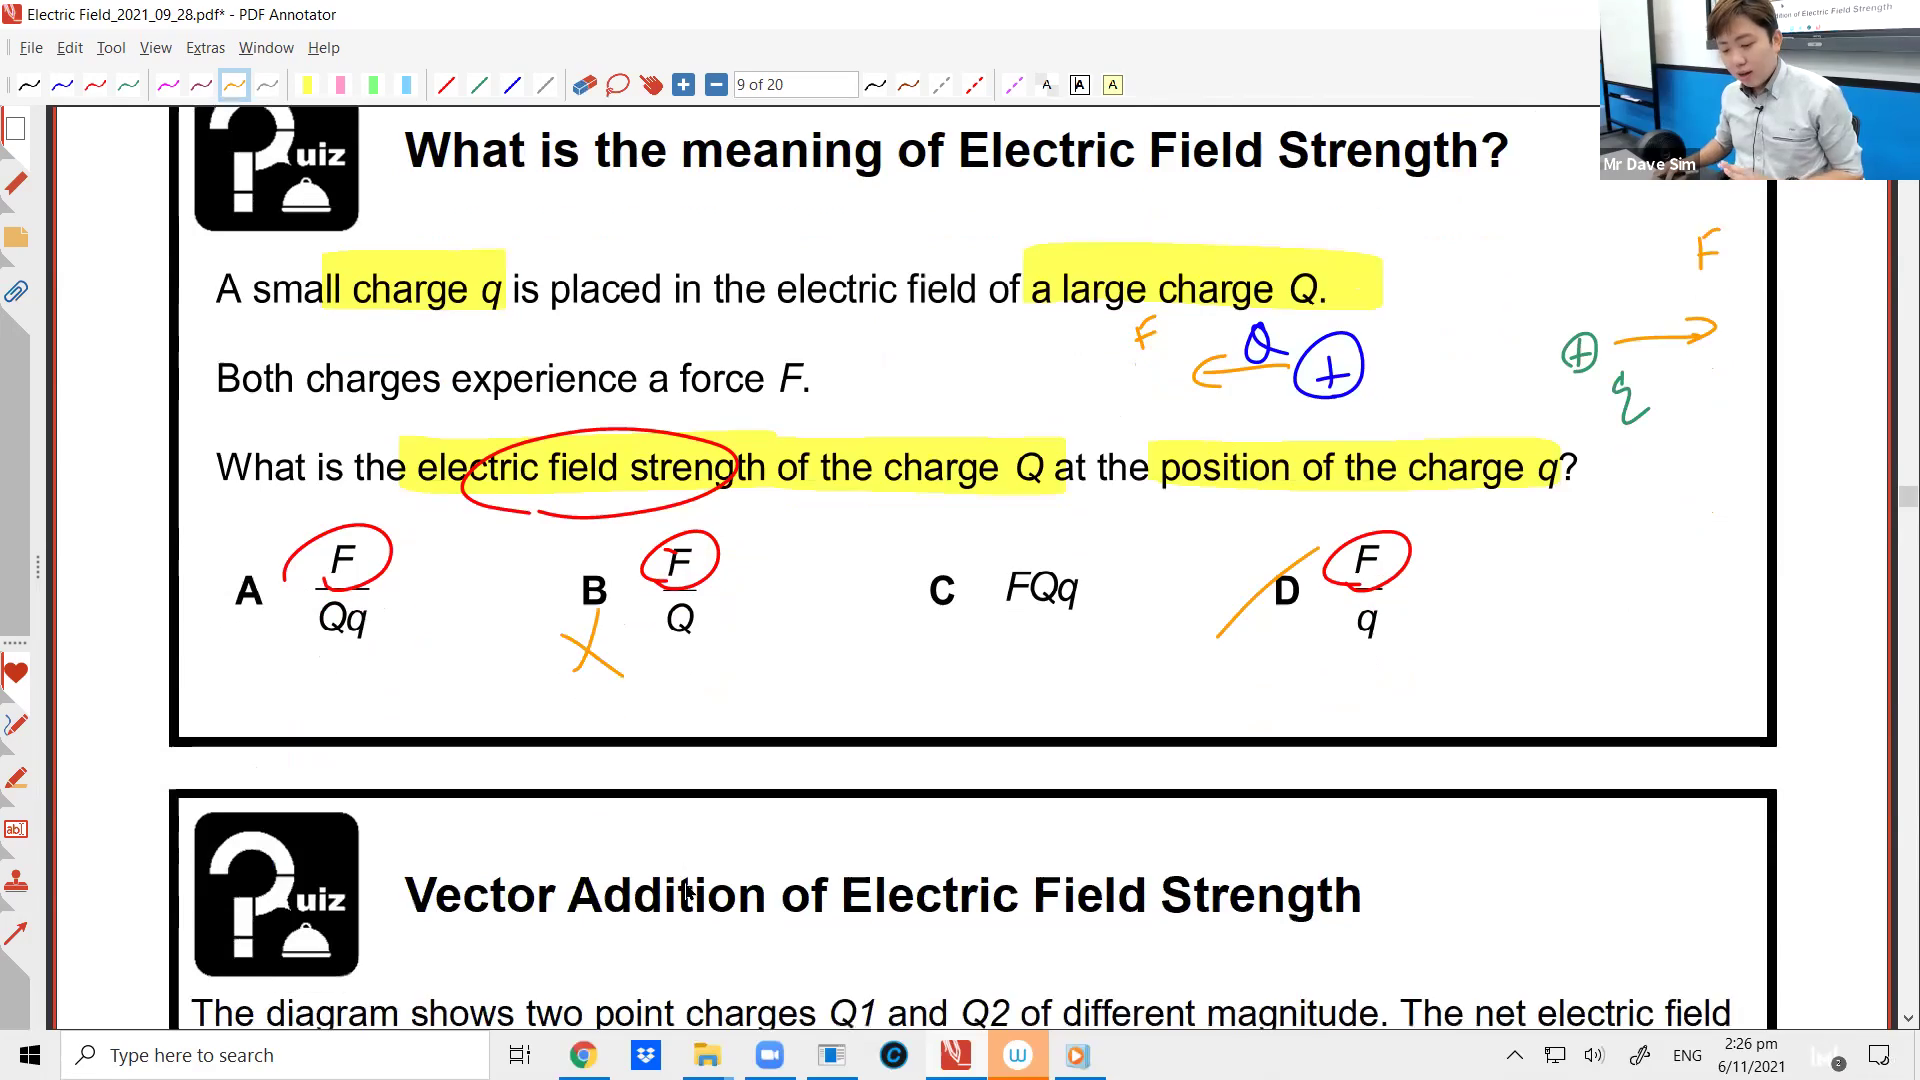 [ELECTRIC FIELD] Electric Field Strength